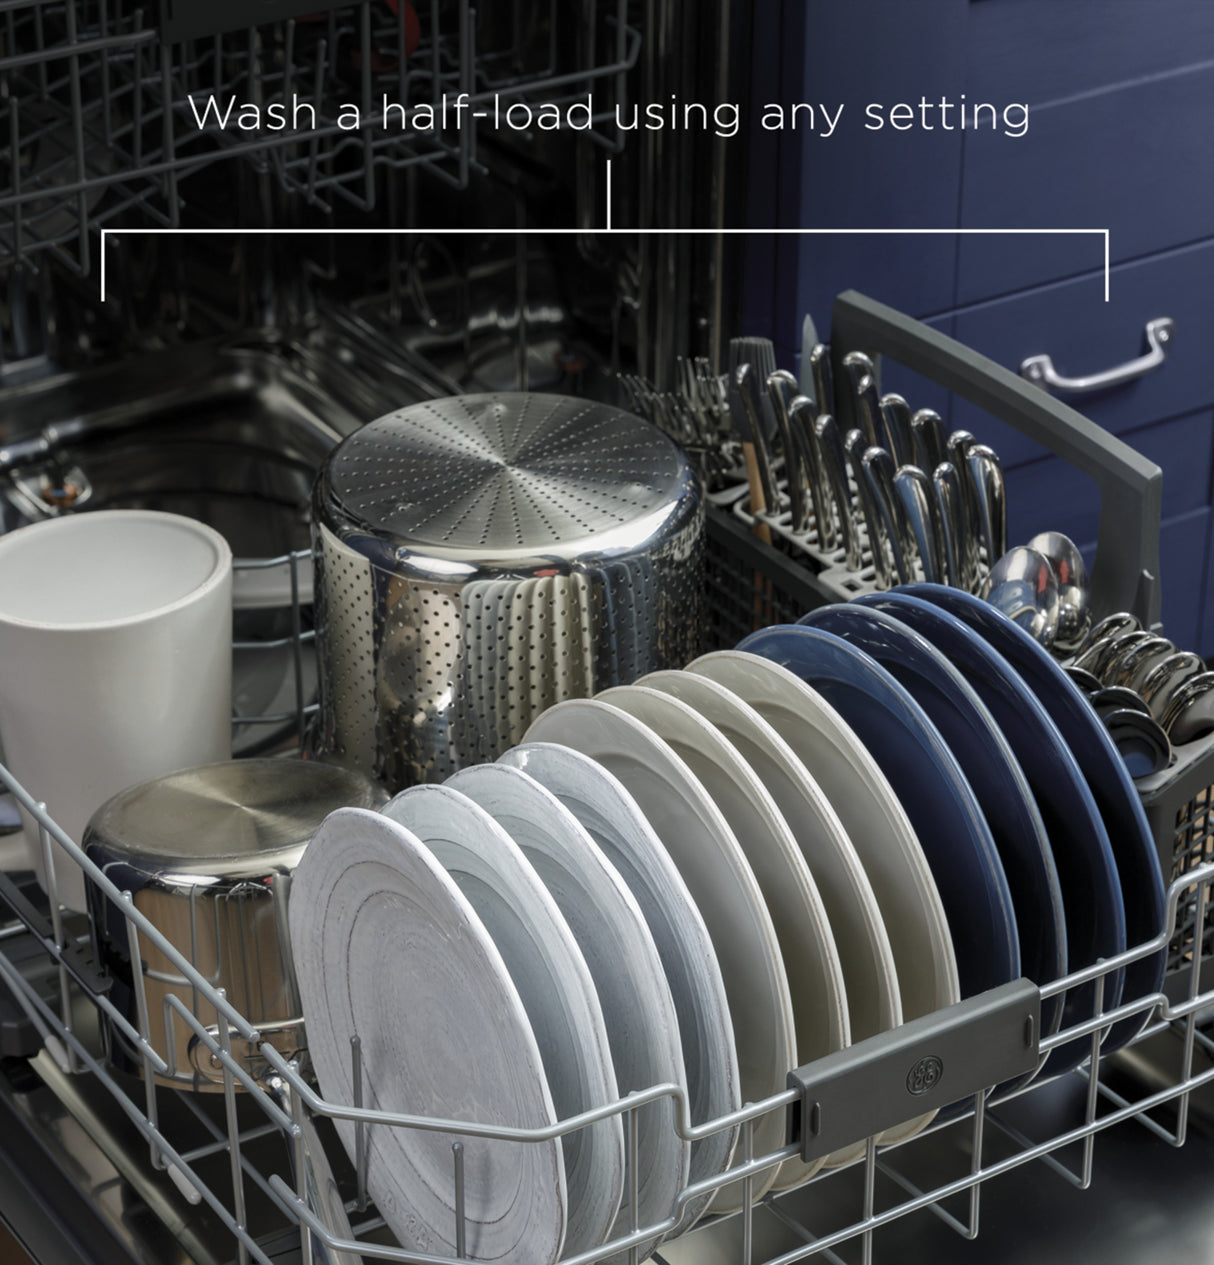 GE(R) ENERGY STAR(R) Top Control with Stainless Steel Interior Dishwasher with Sanitize Cycle & Dry Boost with Fan Assist - (GDT645SGNBB)